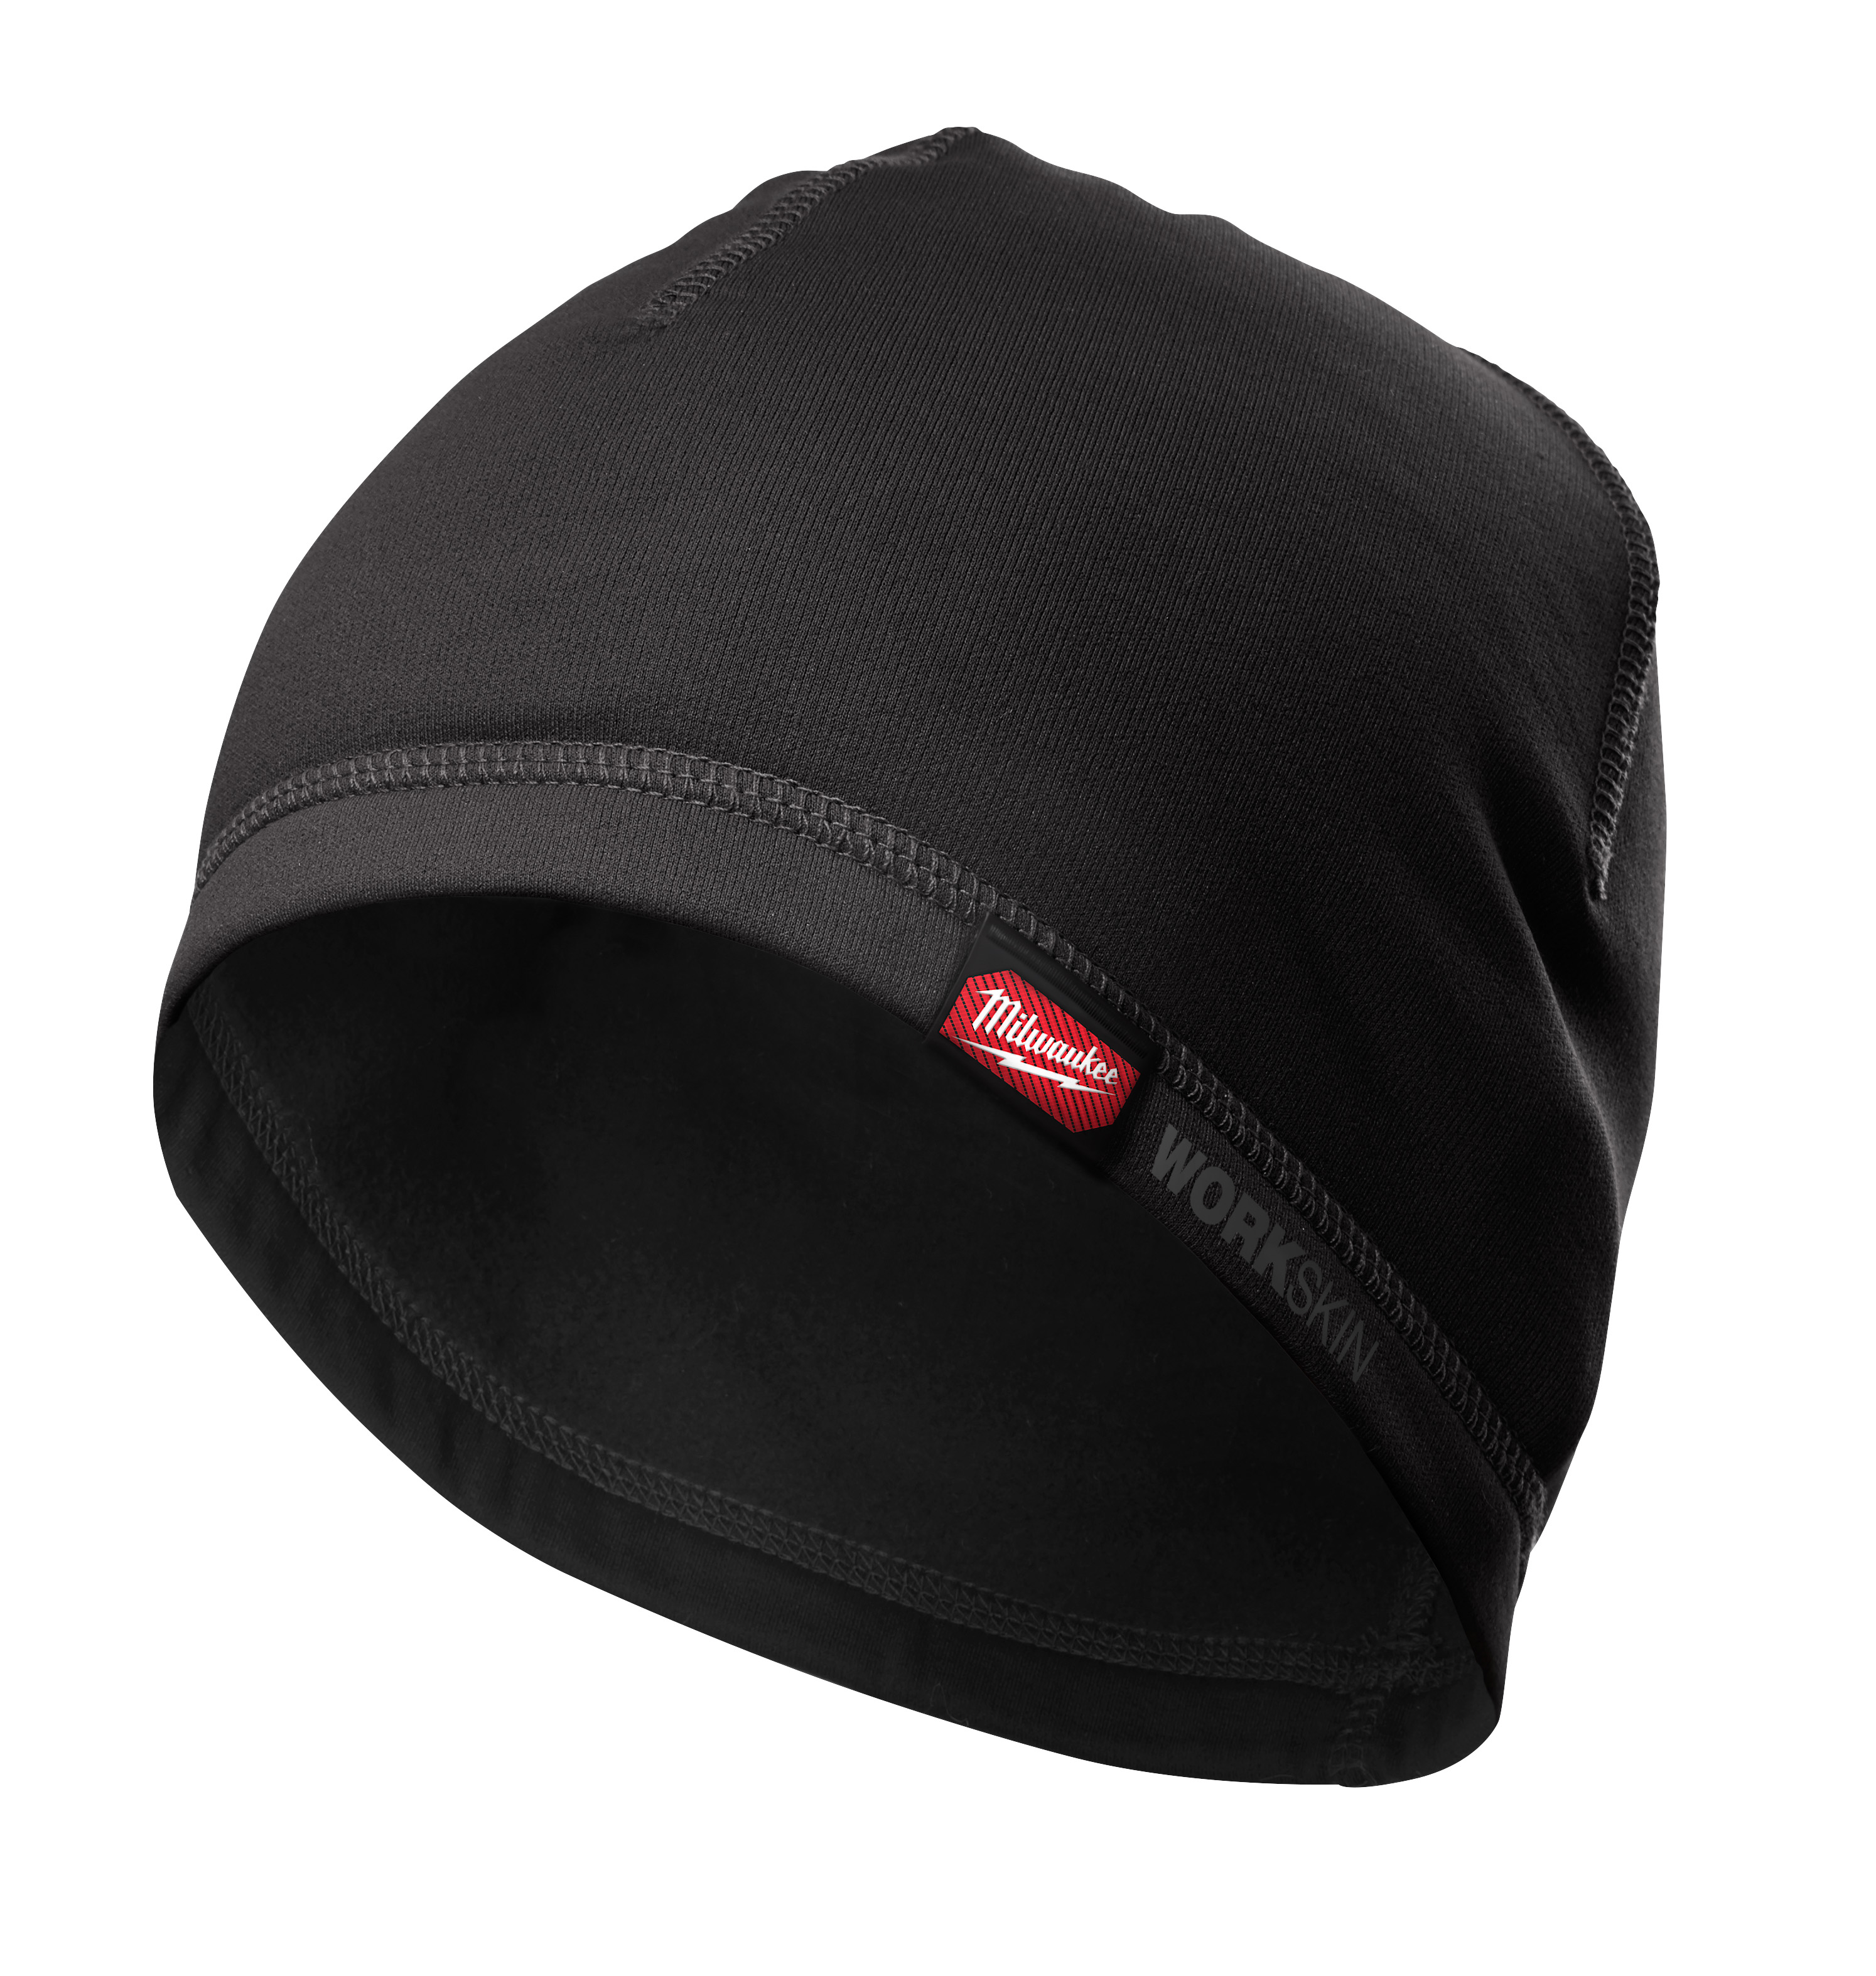 WorkSkin Mid-Weight Cold Weather Hardhat Liner